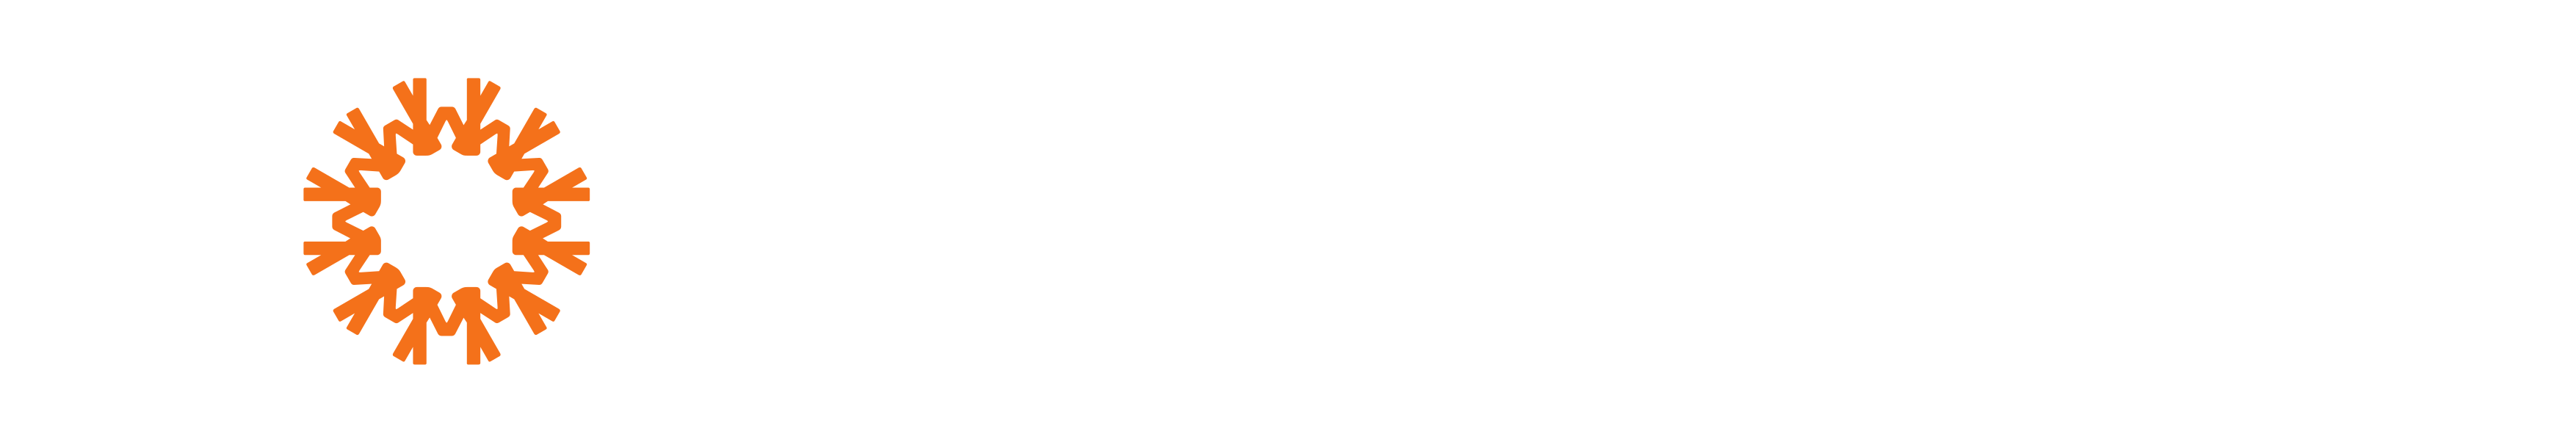 fiedler & peter concepts GmbH fpc Logo weiß 2021 PNG